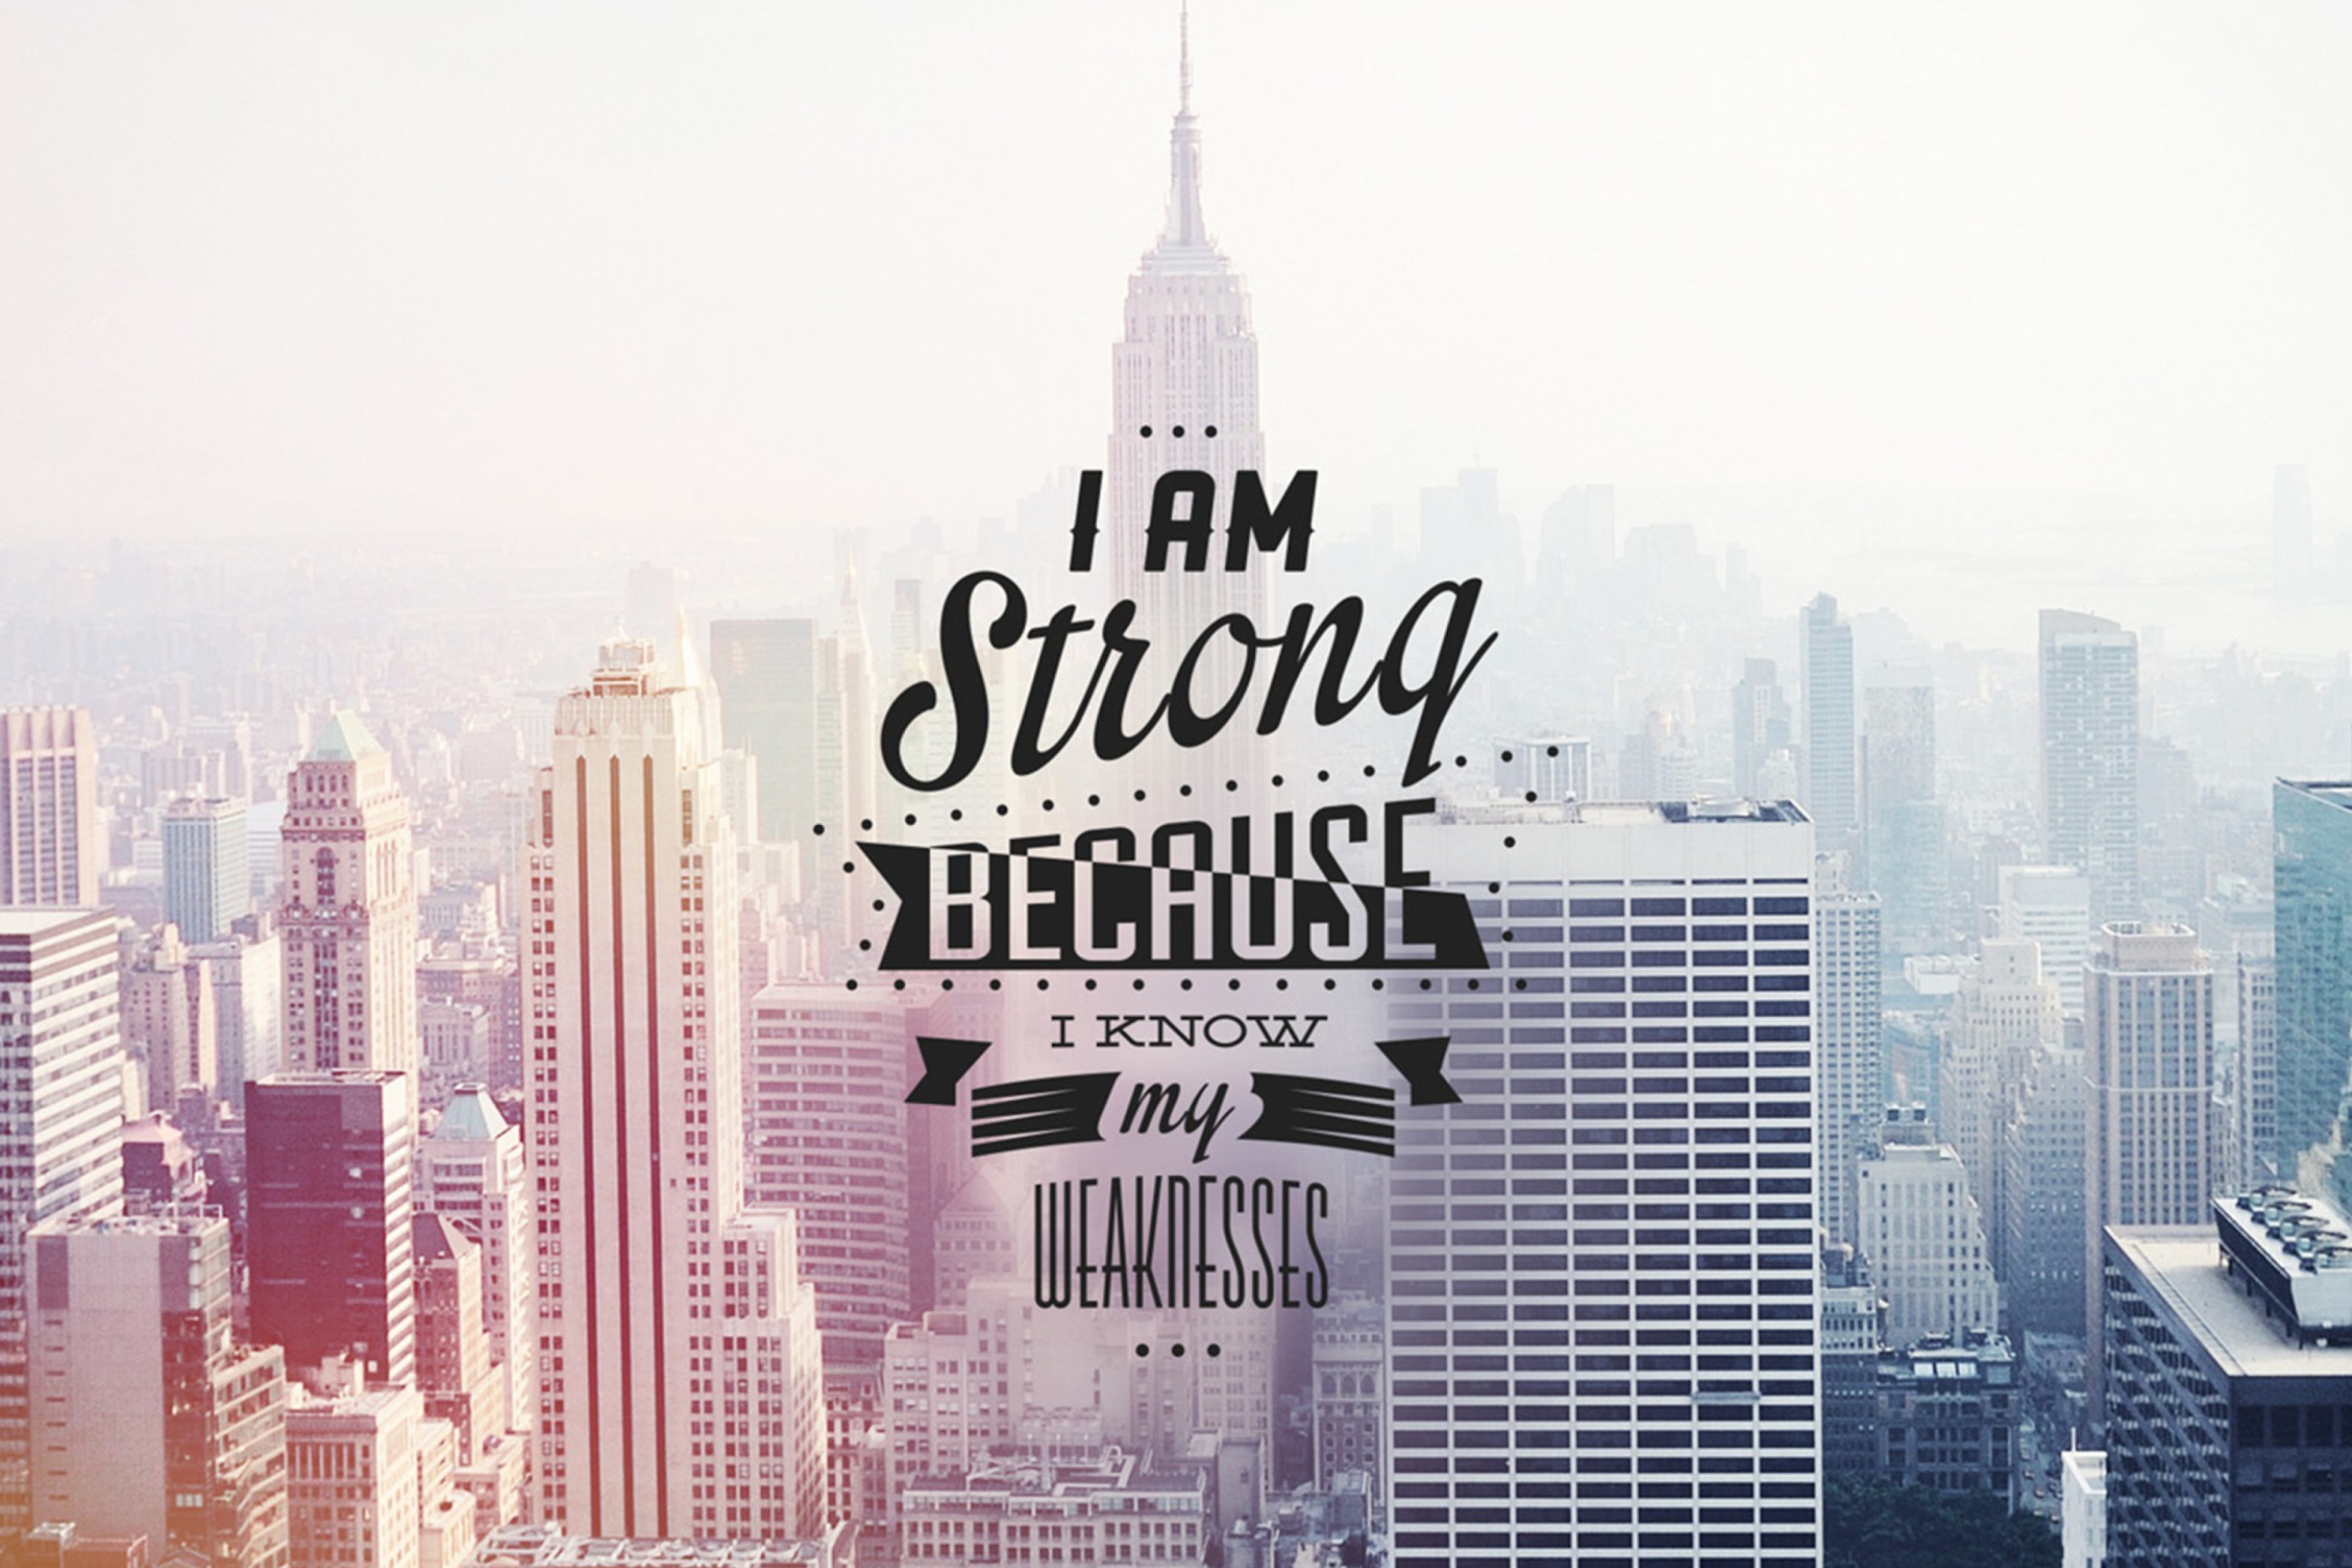 I am strong because i know my weakness screenshot #1 2880x1920